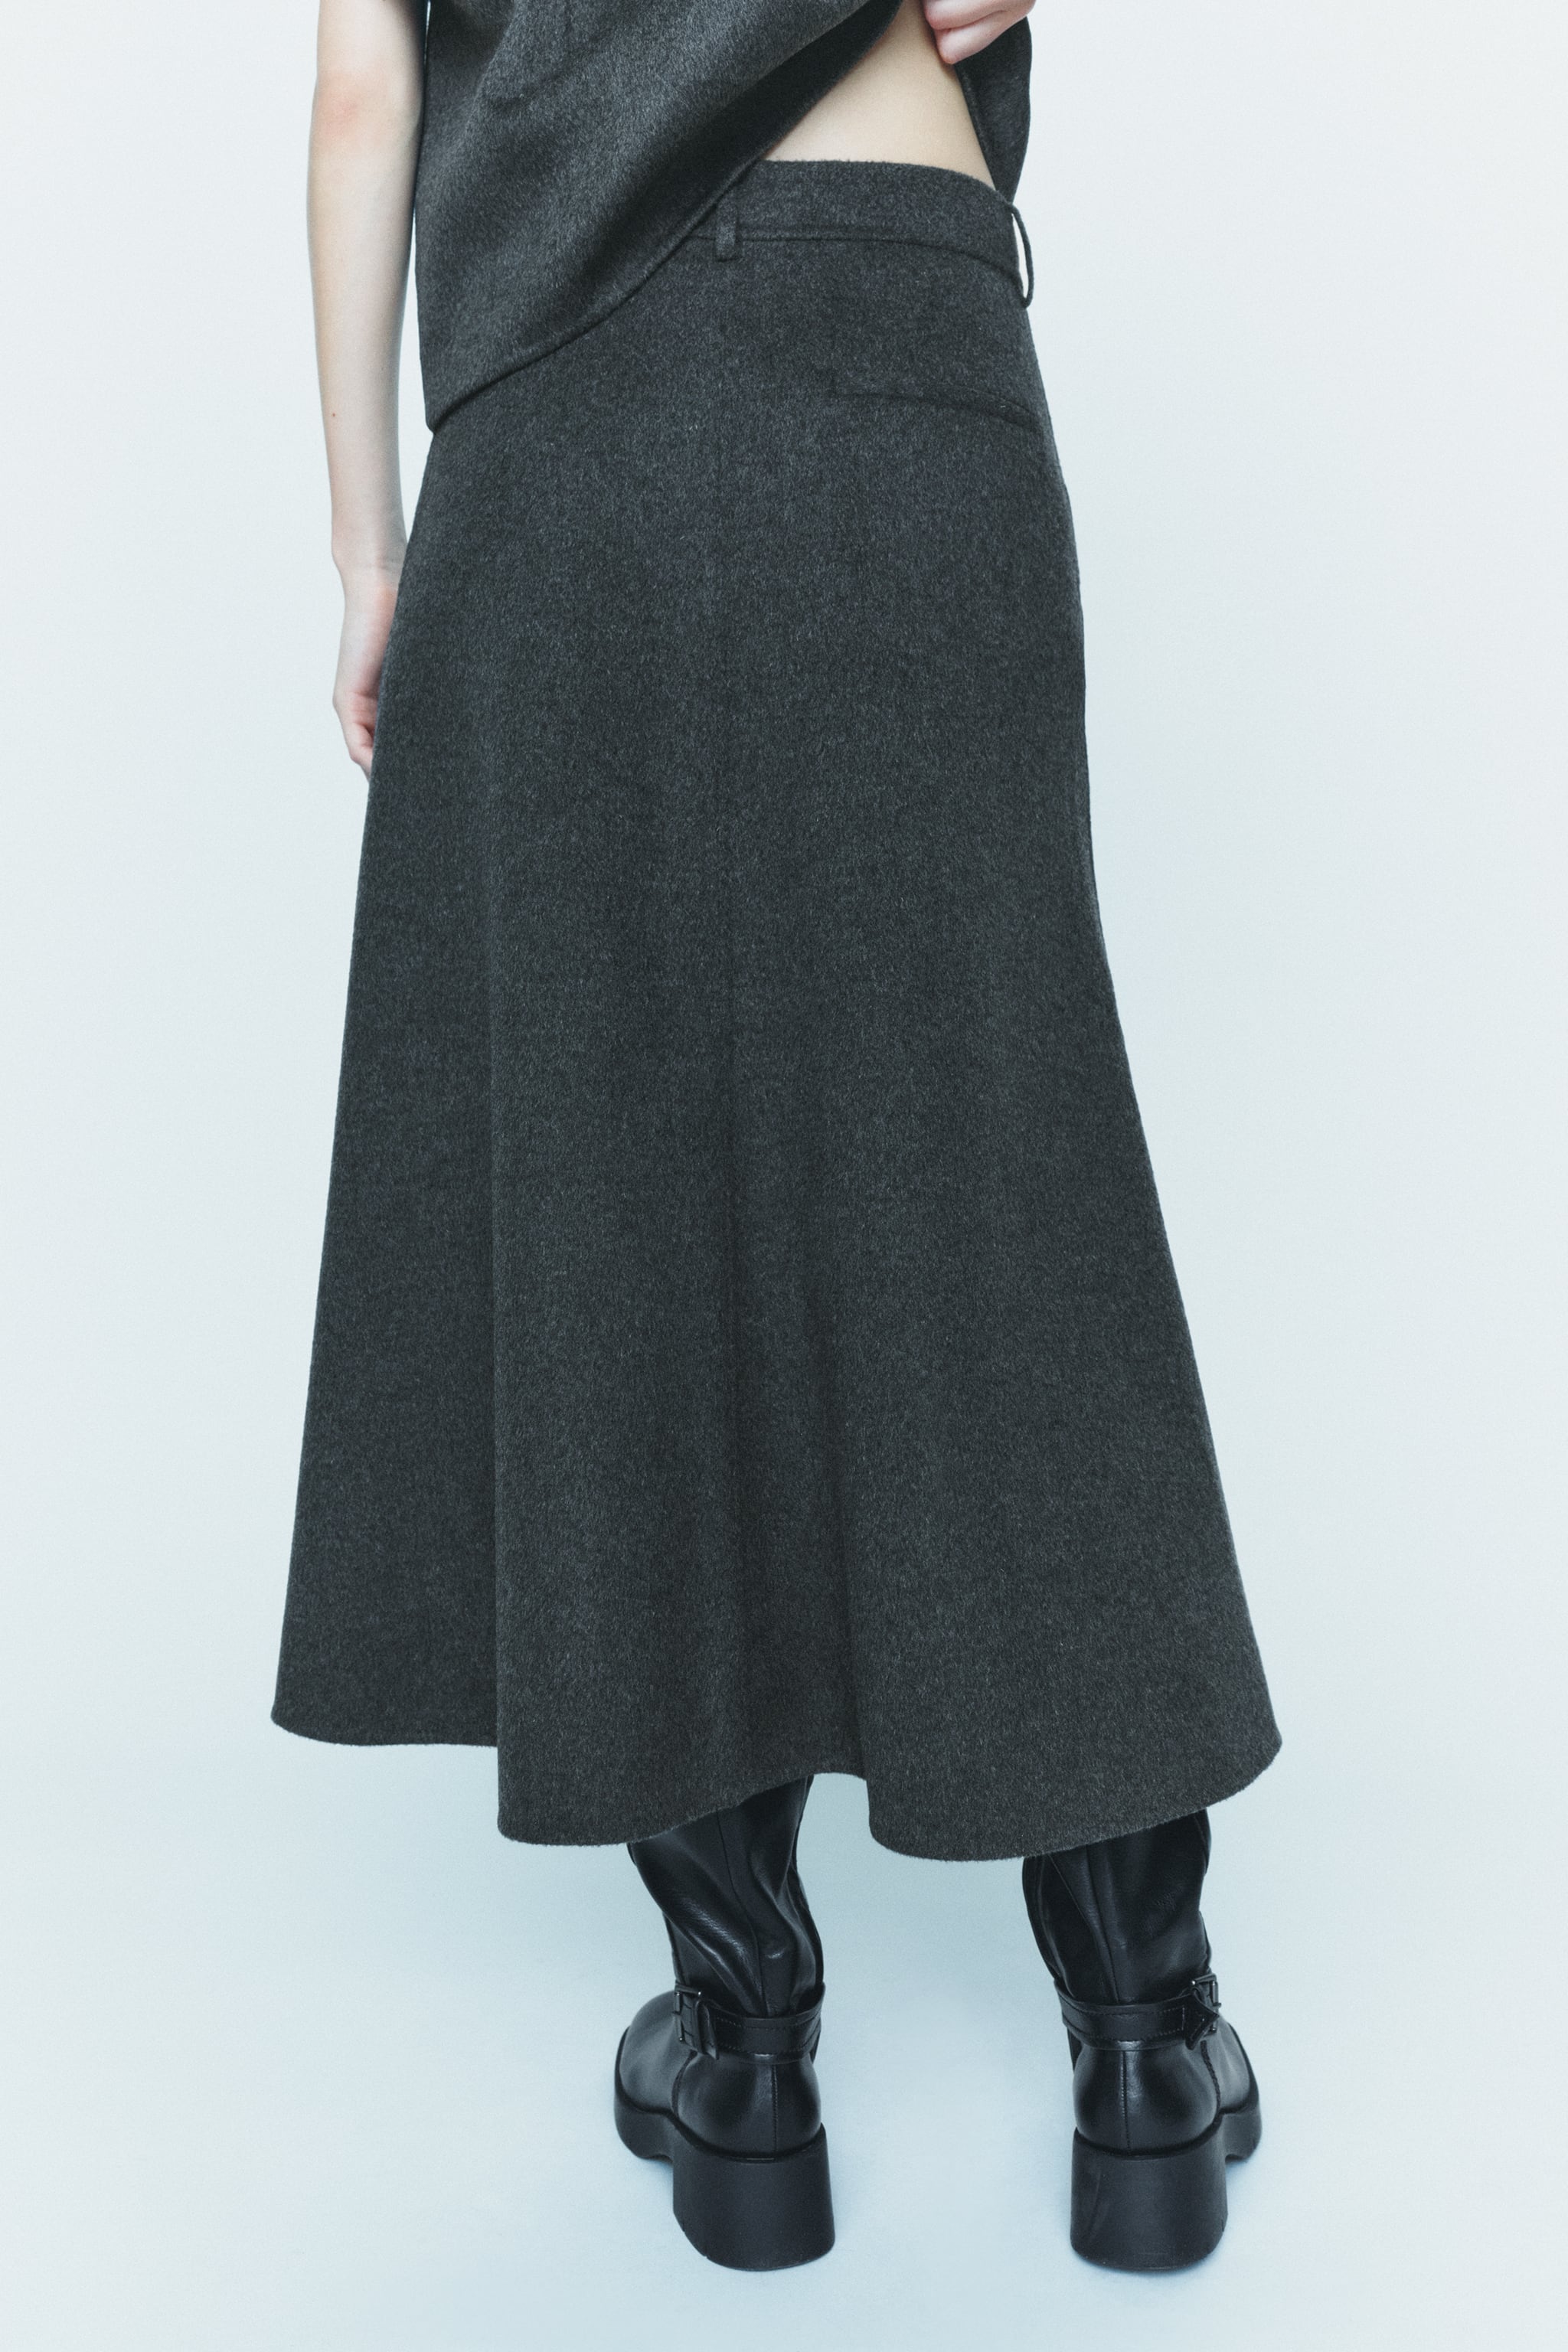 WOOL BLEND CAPE SKIRT ZW COLLECTION